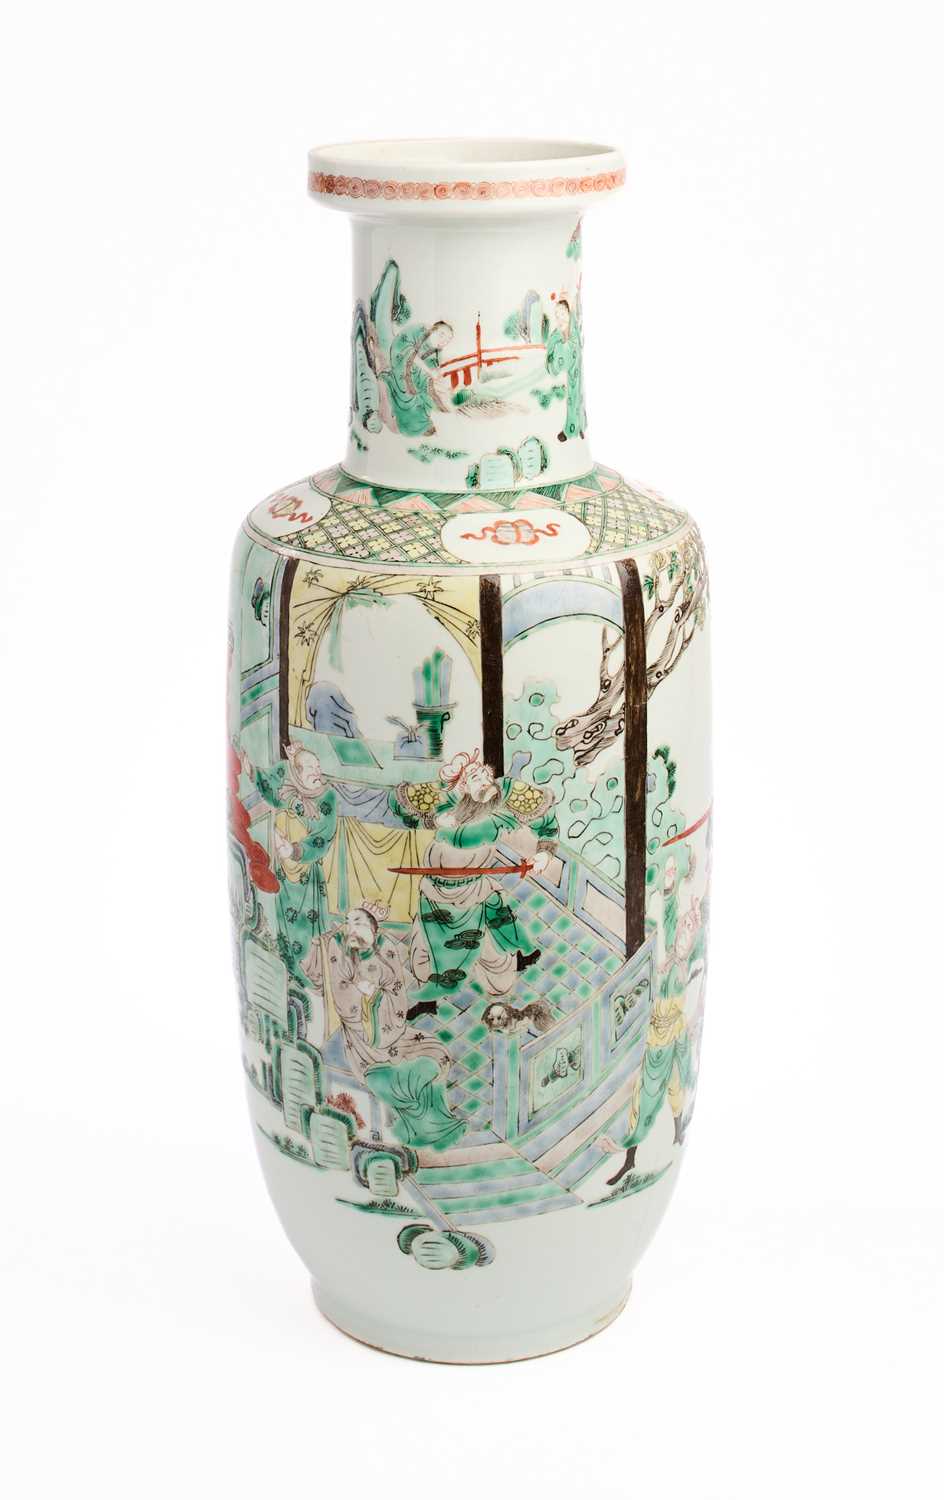 Lot 17 - A CHINESE FAMILLE-VERTE ROULEAU VASE, QING DYNASTY, 19TH CENTURY